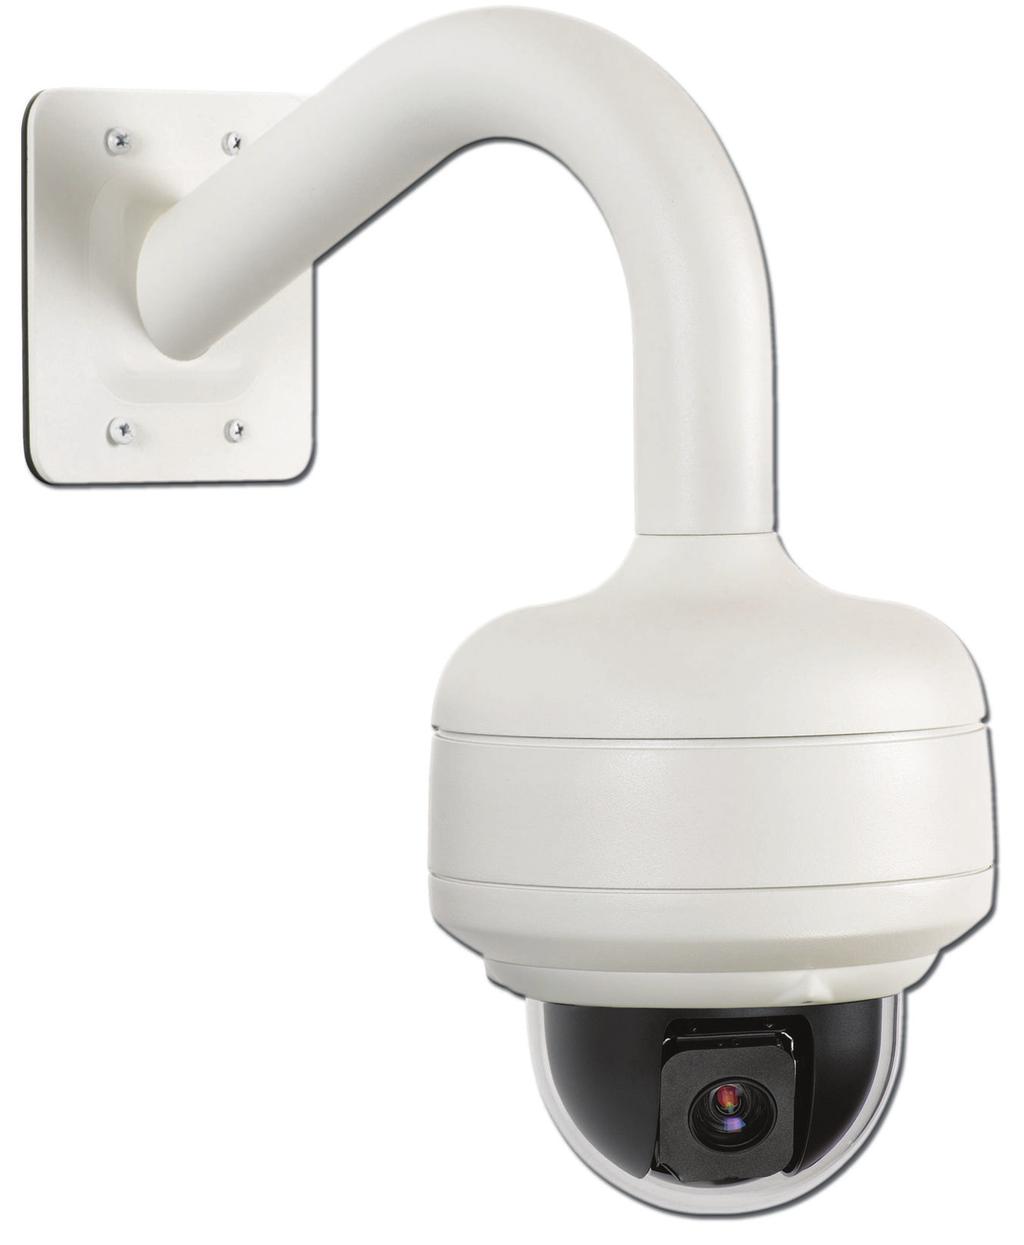 CCTV AutoDome Easy II AutoDome Easy II Ultra compact for discrete surveillance and improved aesthetics High-speed 360-degree continuous pan High resolution/sensitivity 530 TVL color camera 120x zoom